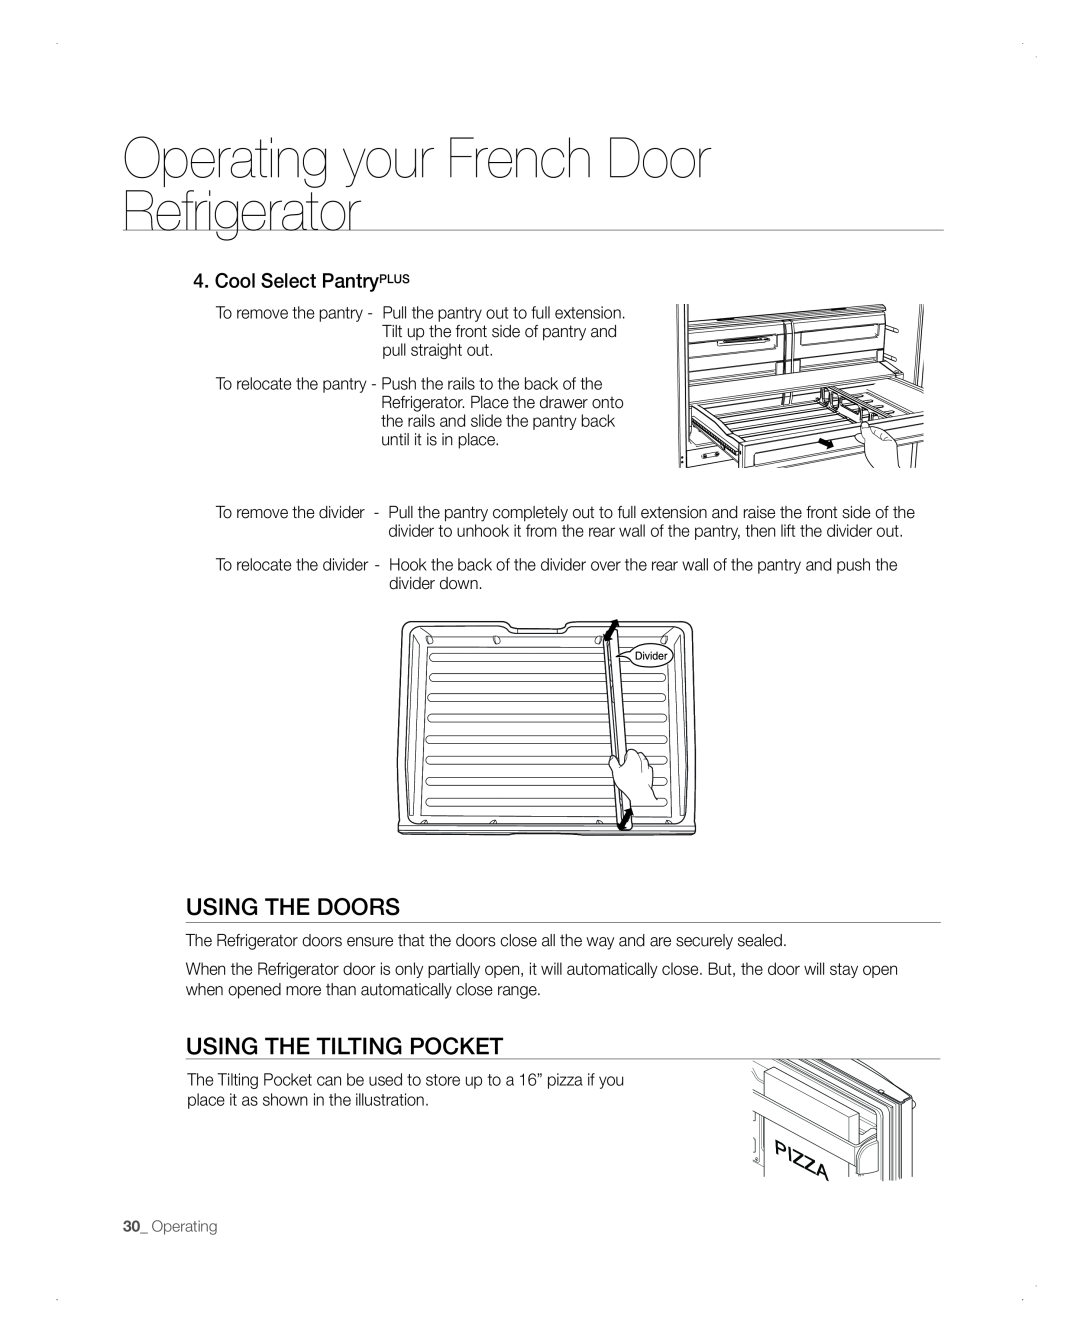 Samsung RFG298AARS user manual using tHe DooRs, usinG tHE tiLtinG PoCKEt, Operating your French Door Refrigerator 